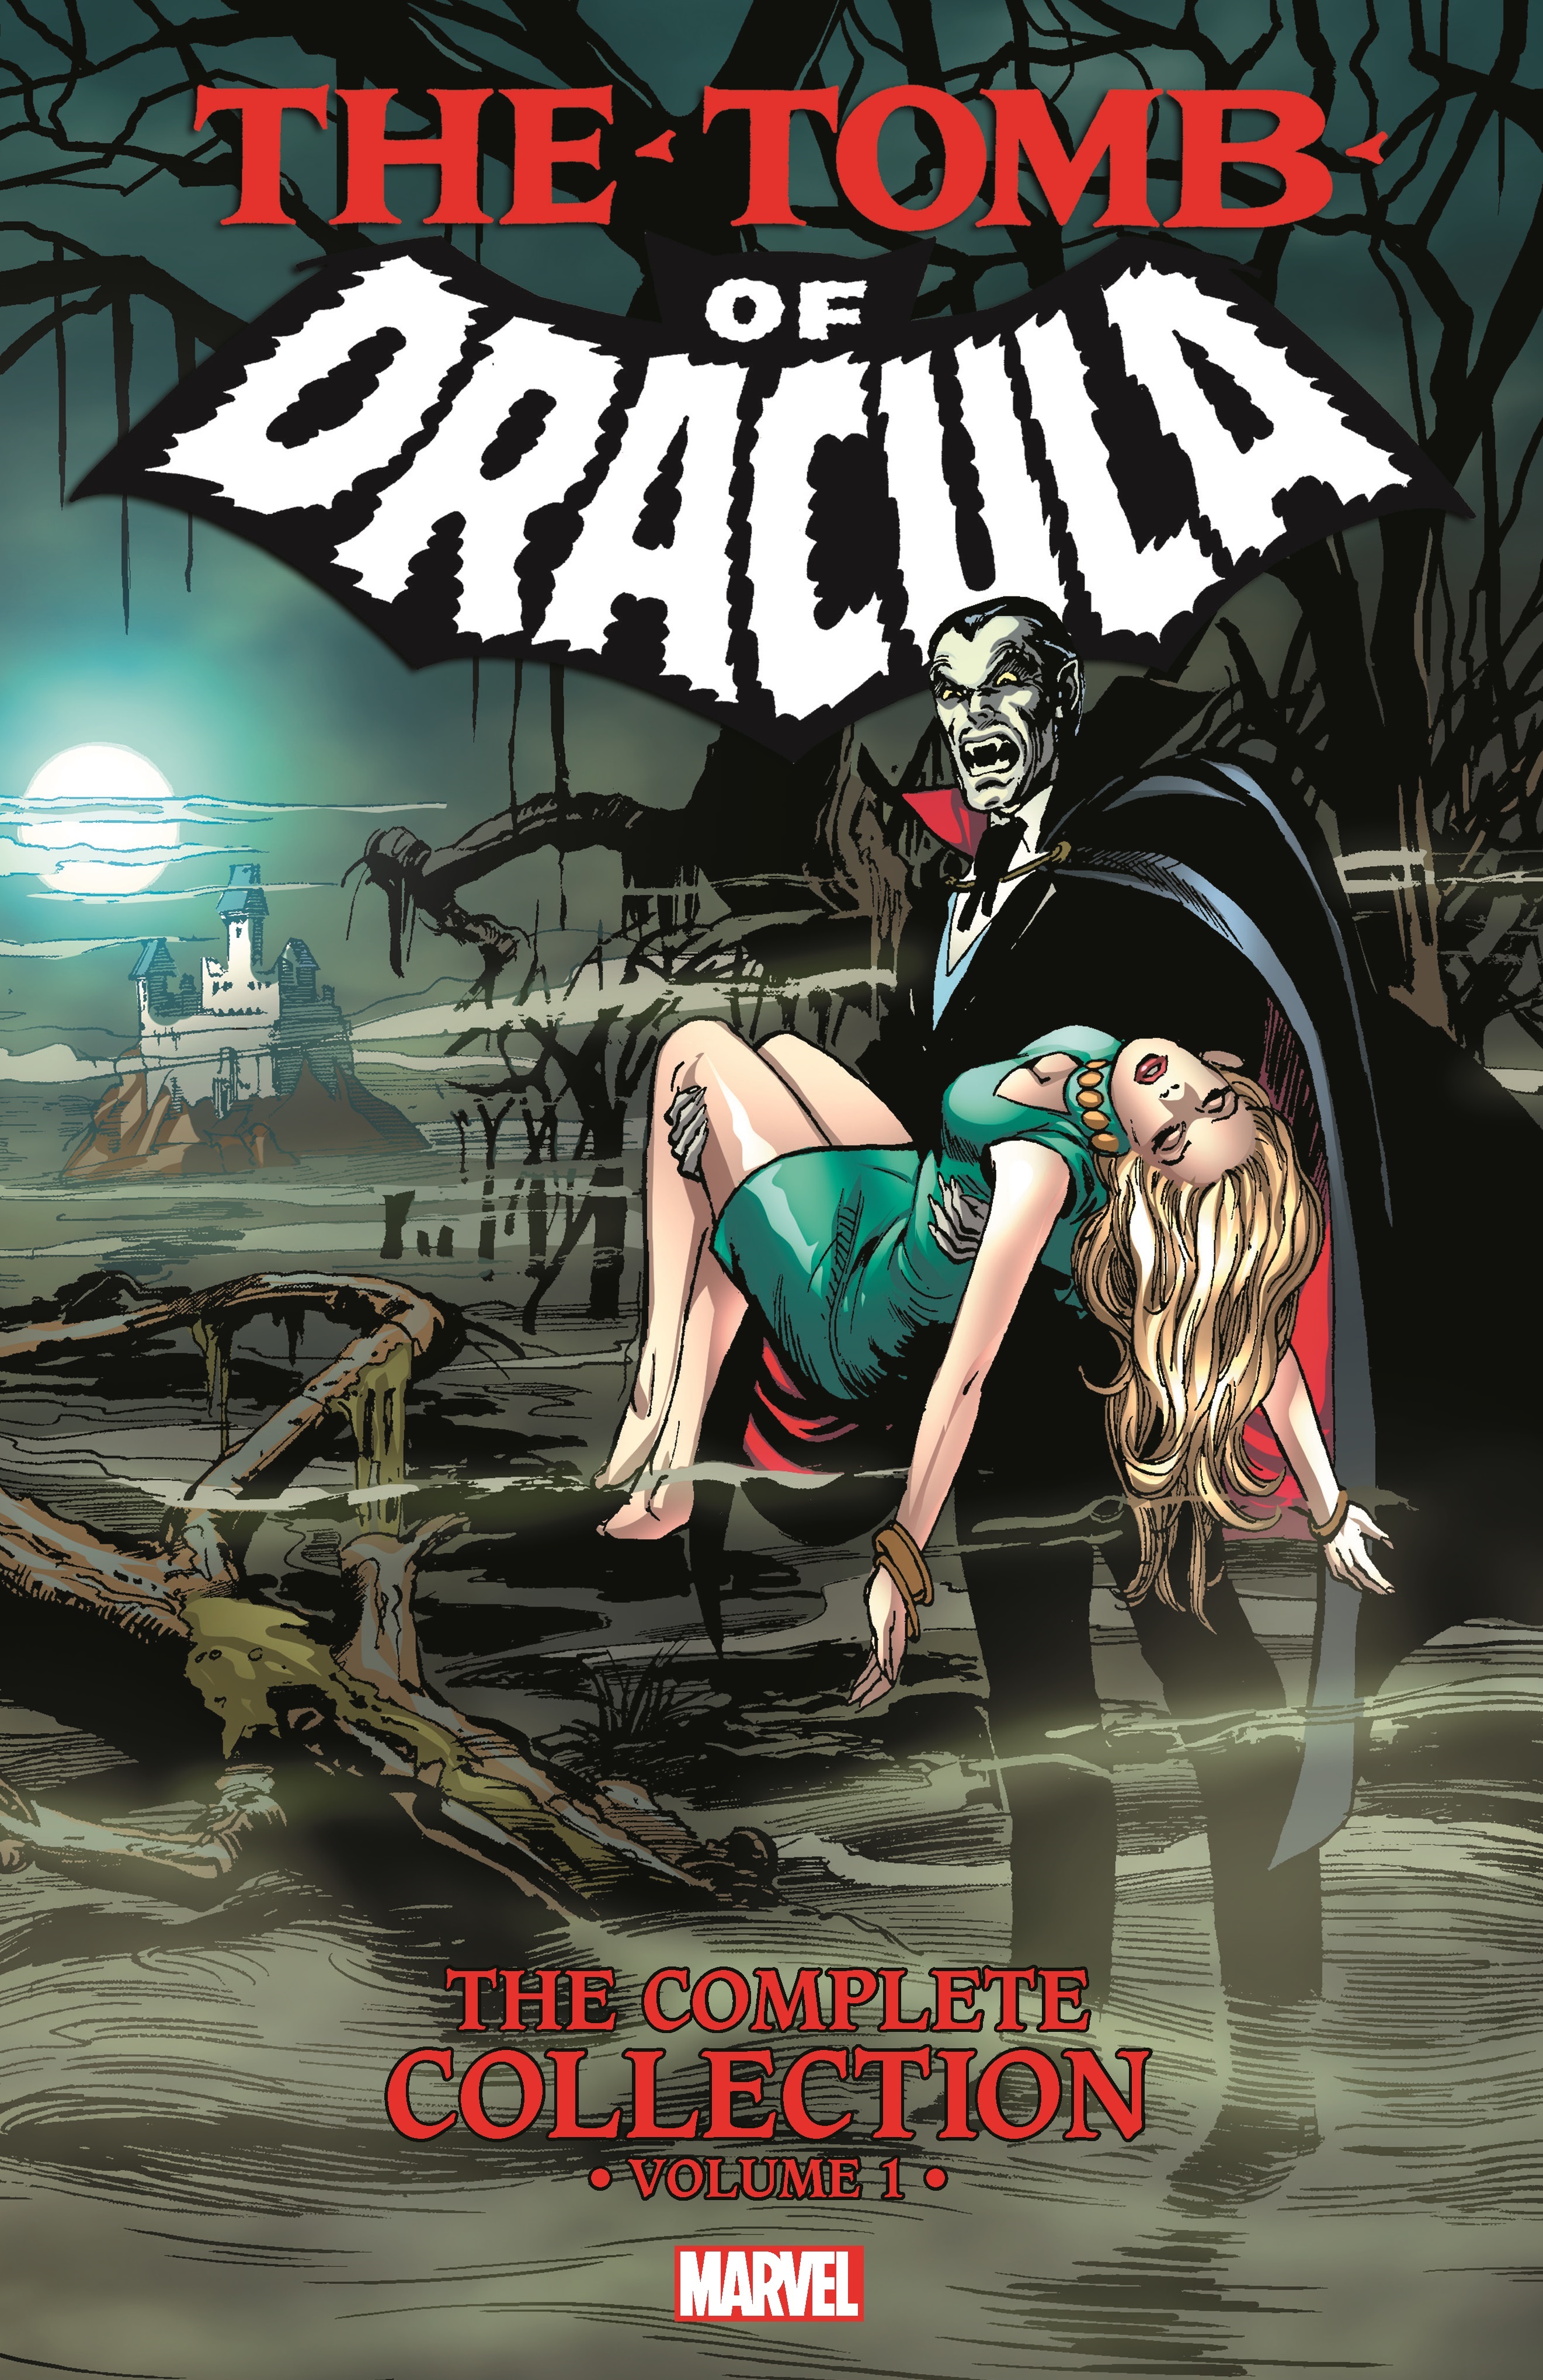 TOMB OF DRACULA: THE COMPLETE COLLECTION VOL. 1 TPB (Trade Paperback)